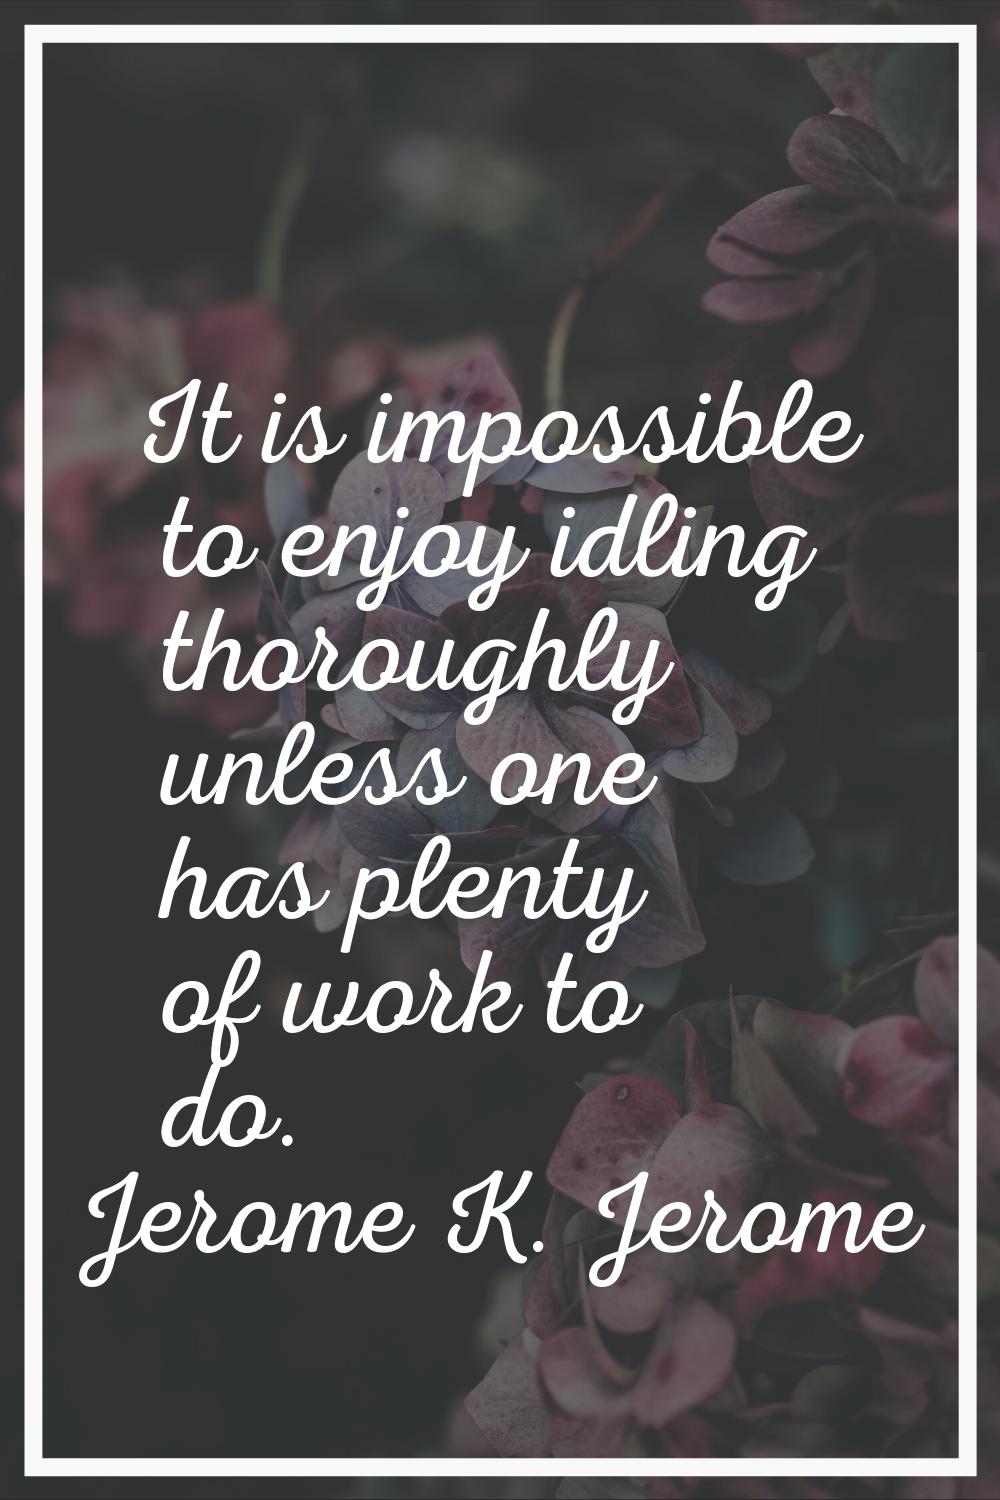 It is impossible to enjoy idling thoroughly unless one has plenty of work to do.